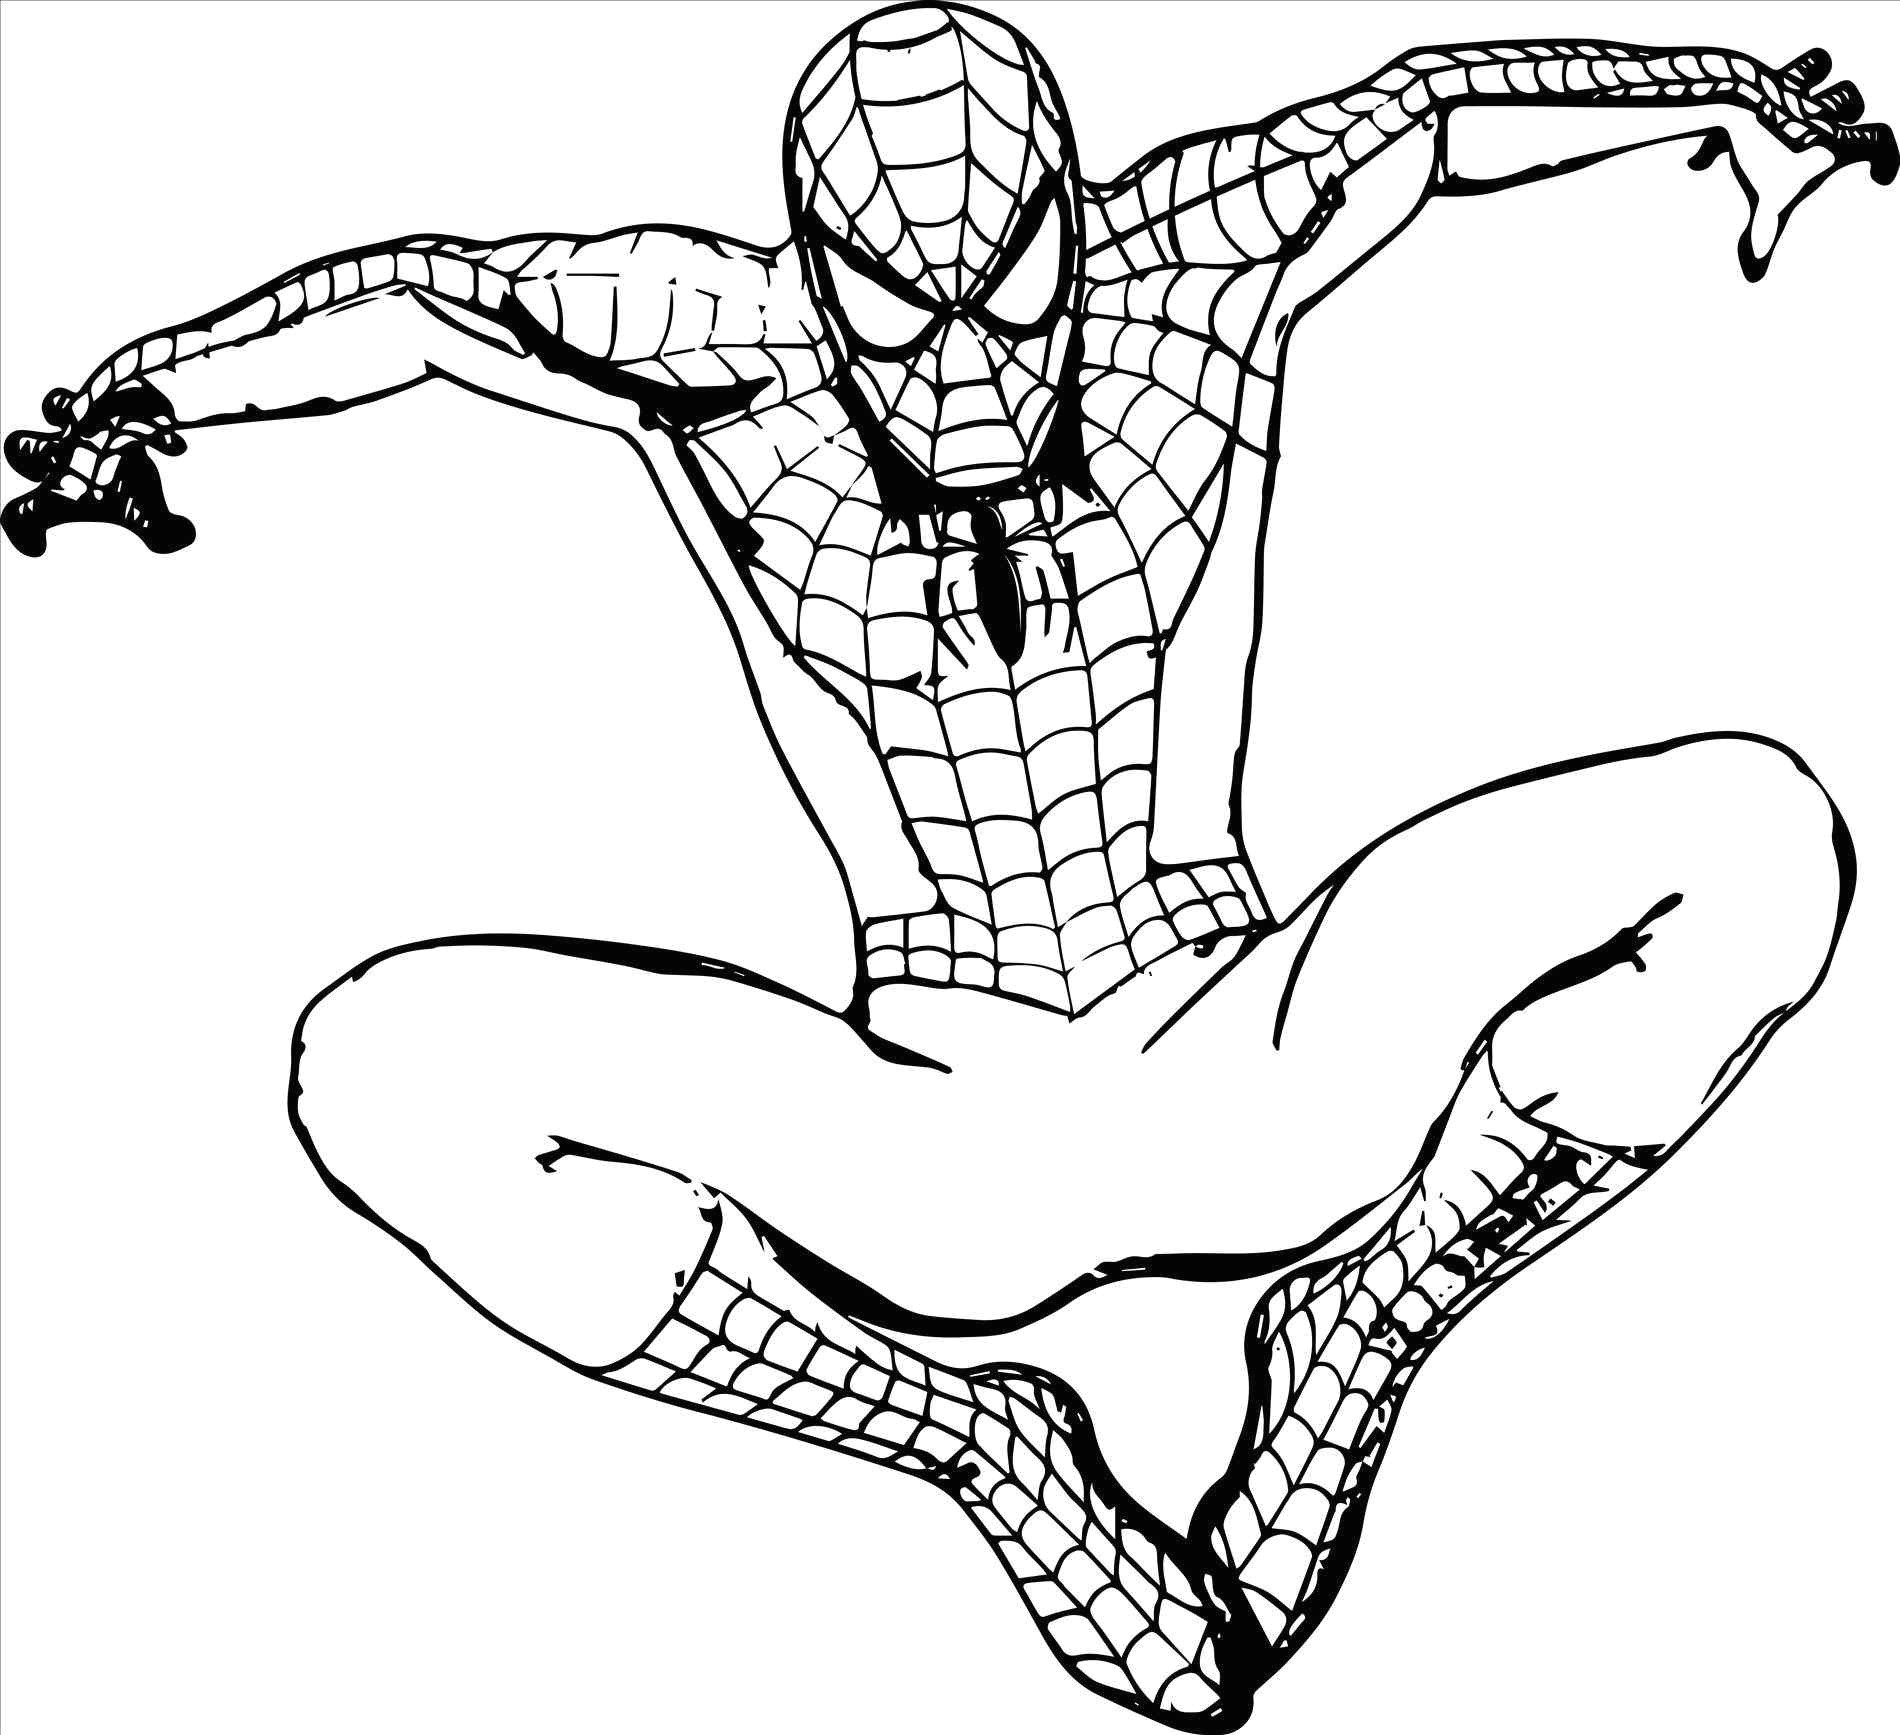 Drawing A Cartoon Superhero Spiderman Coloring Pages to Print Luxury Superheroes Easy to Draw